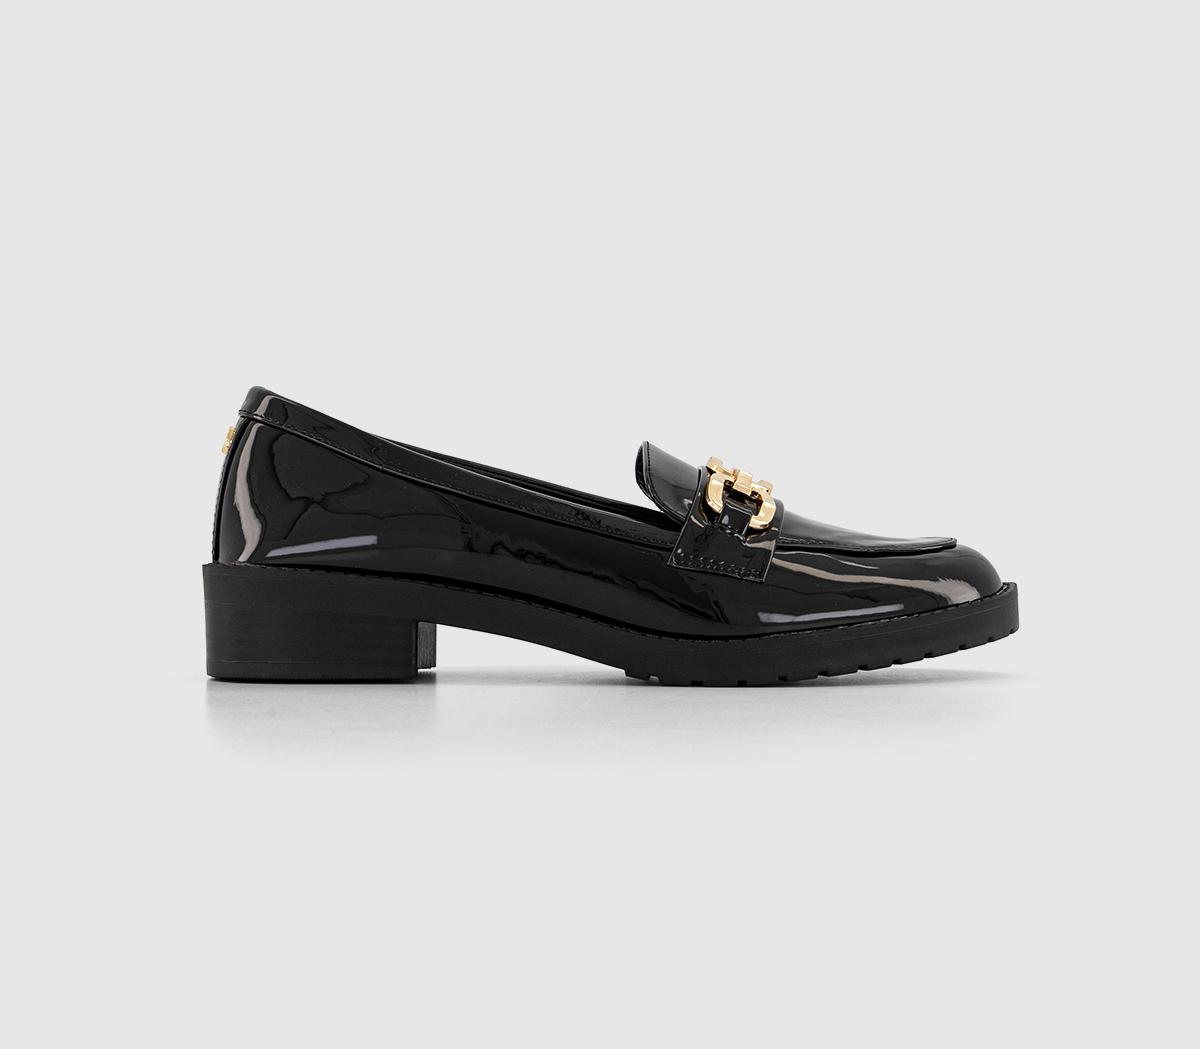 Forget Me Not Metal Trim Loafers Black Patent